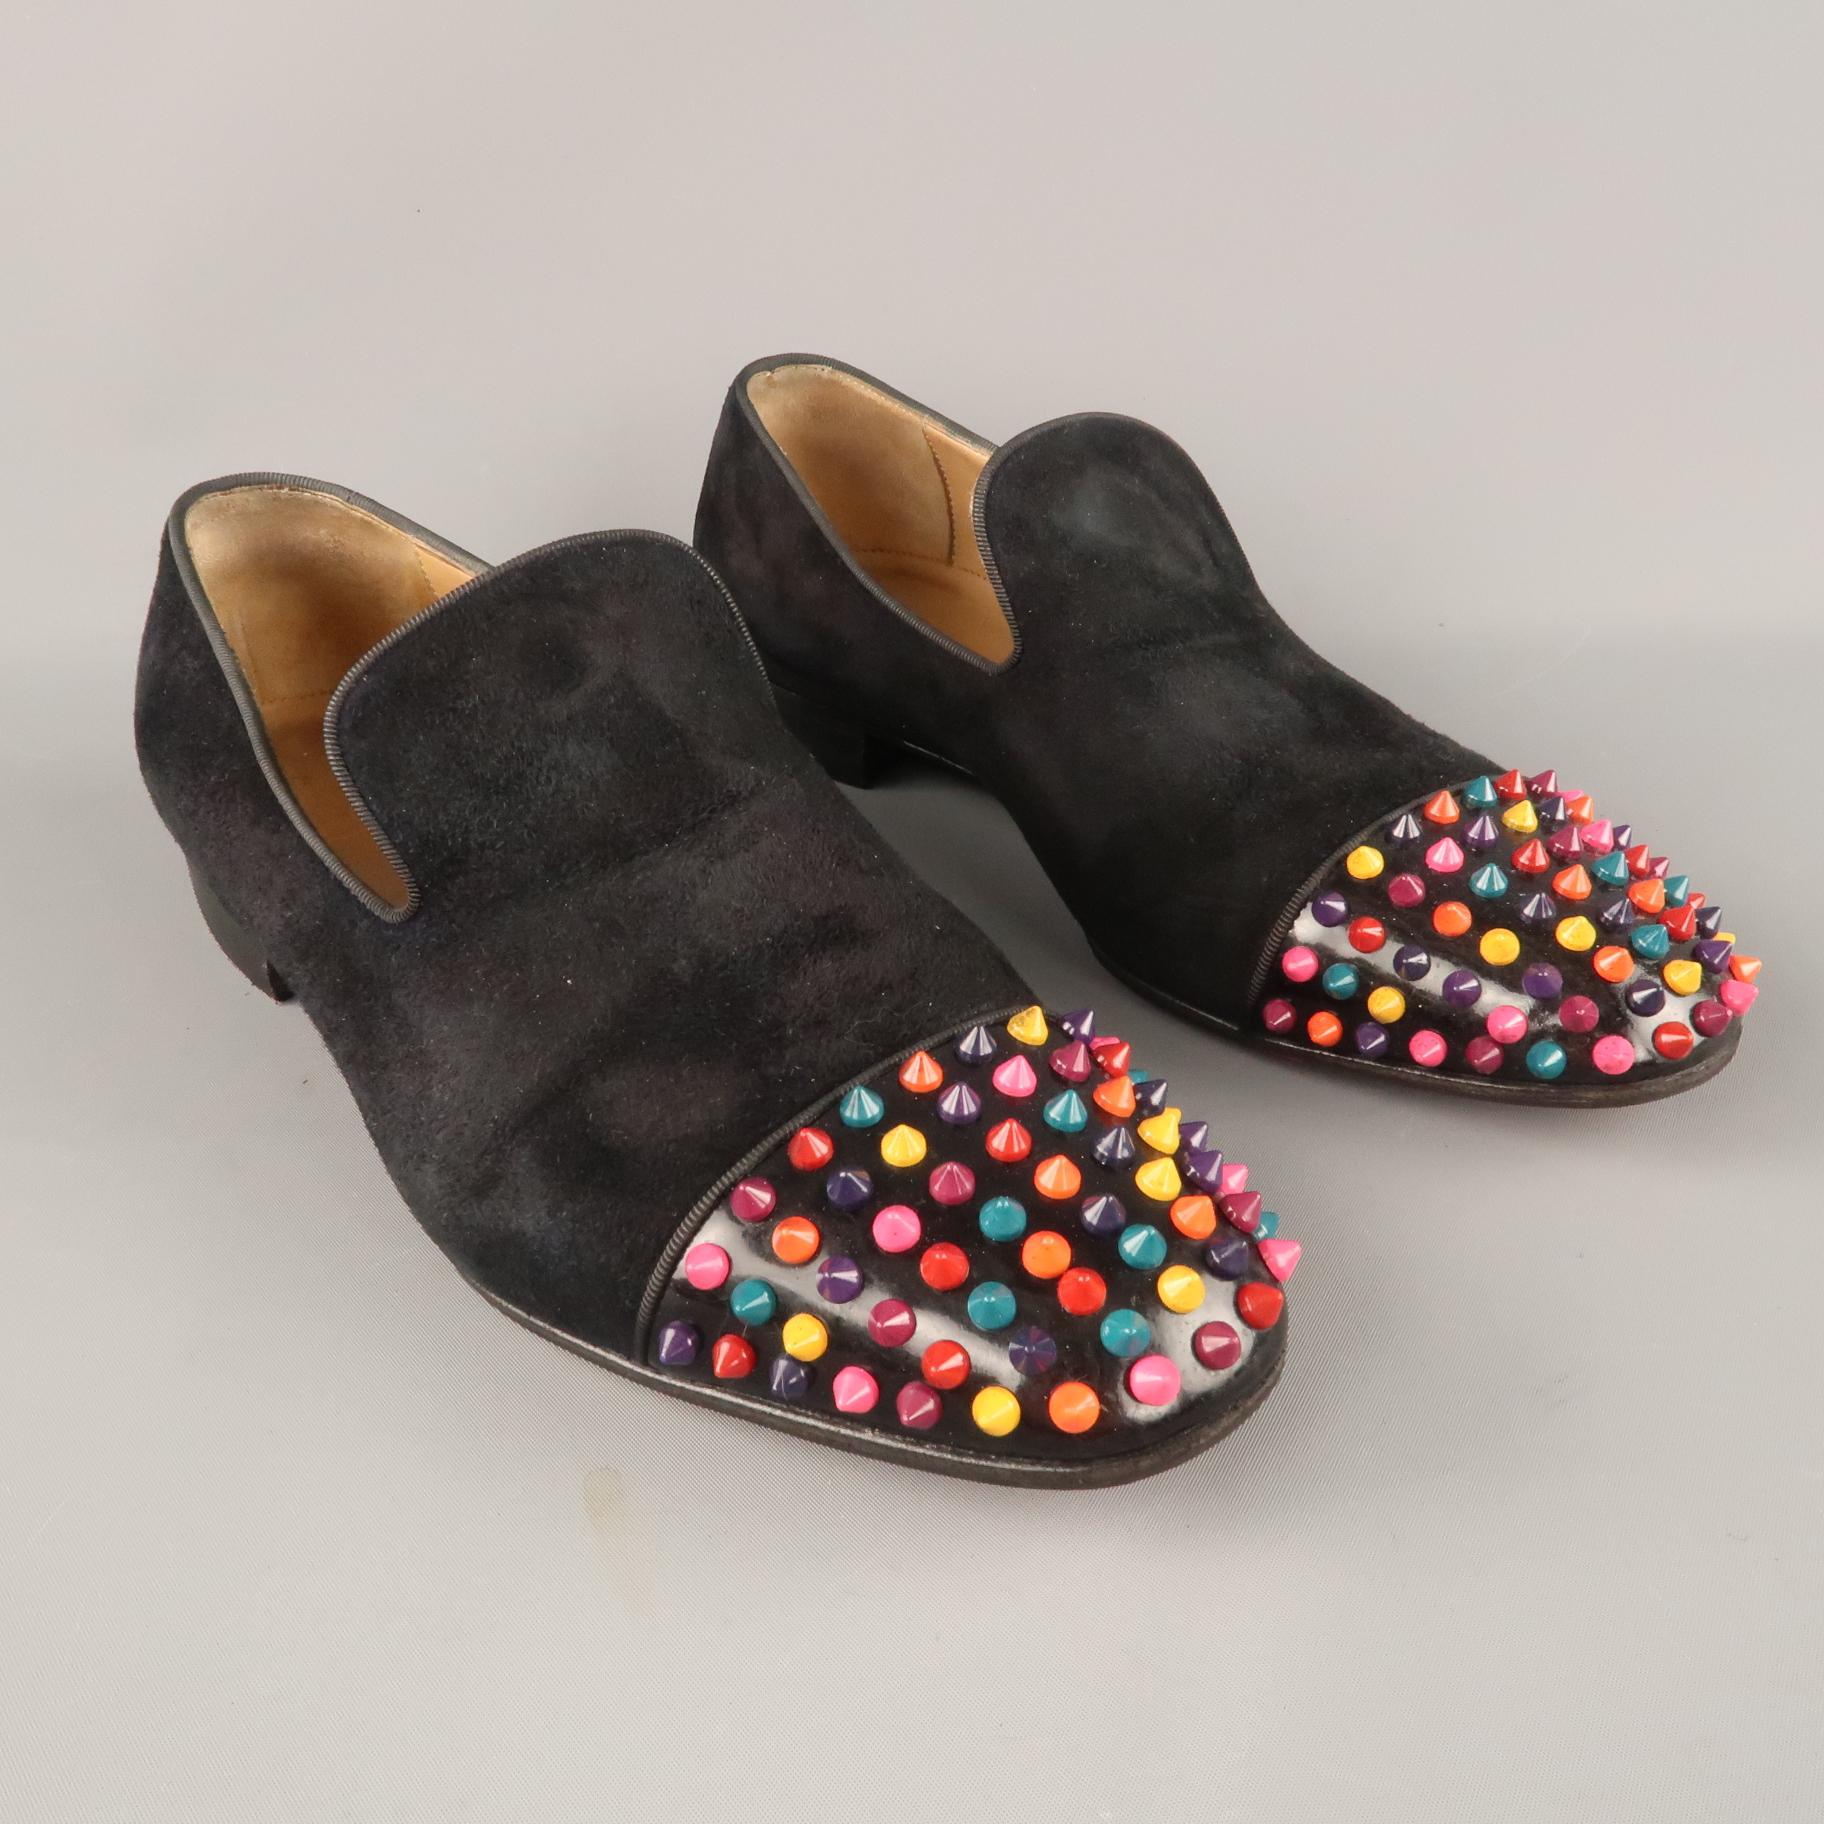 CHRISTIAN LOUBOUTIN Loafers Shoes comes in a black suede and patent leather material, featuring a cap toe with multicolored spike embellishments and a black trim, resoled. With spikes replacement.  Made in Italy.
 
Excellent Pre-Owned